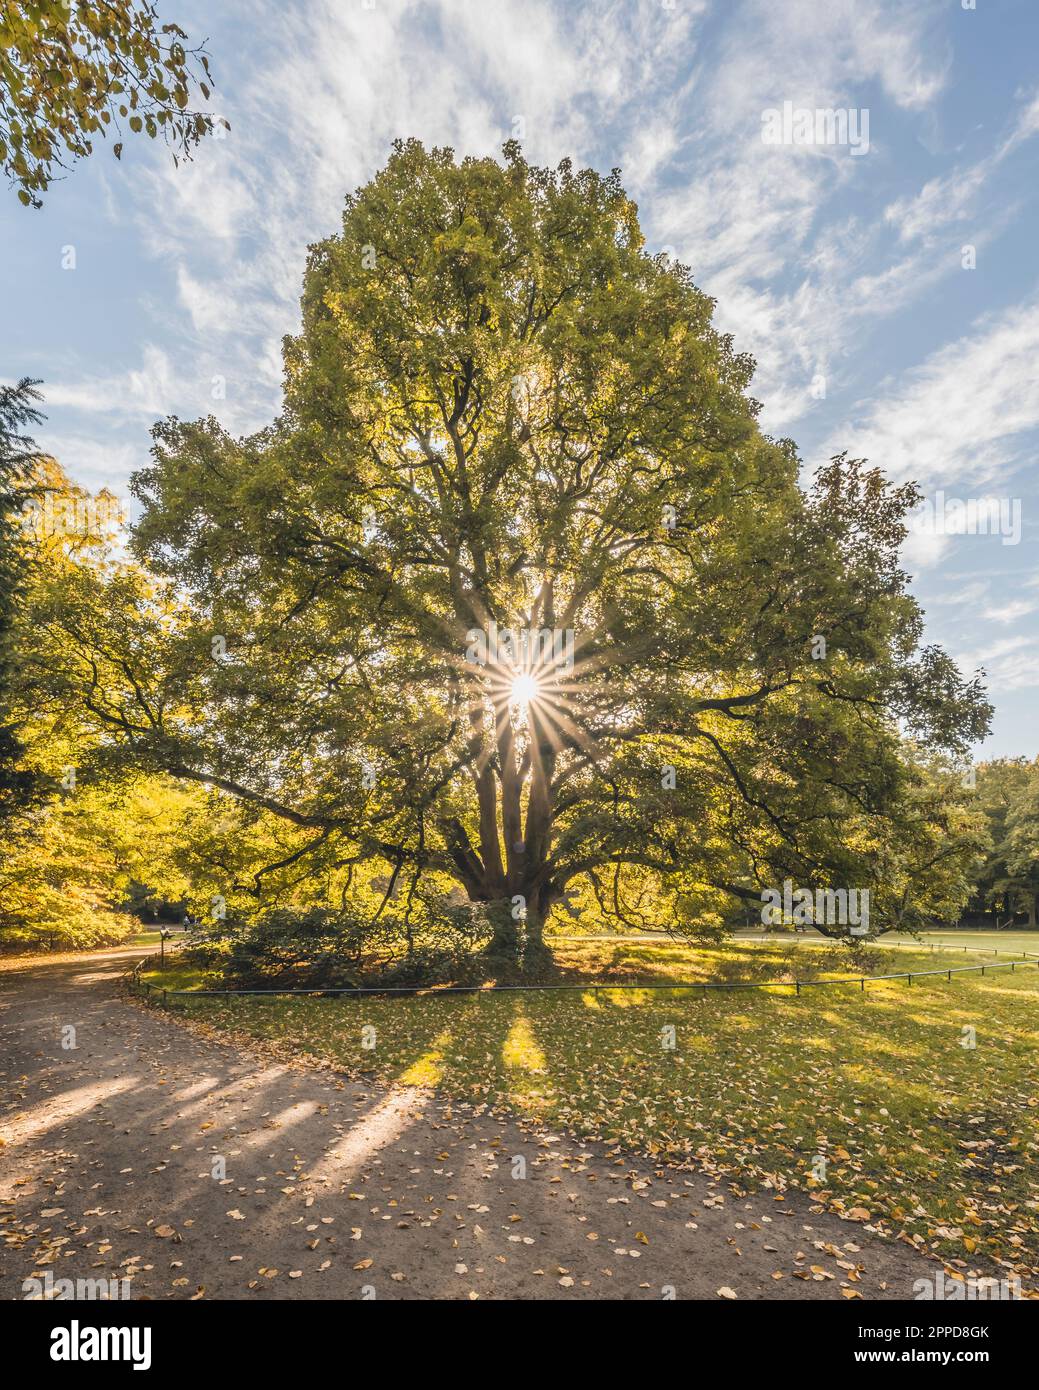 Germany, Hamburg, Sun shining through branches of old sycamore tree (Acer pseudoplatanus) in Hirschpark Stock Photo